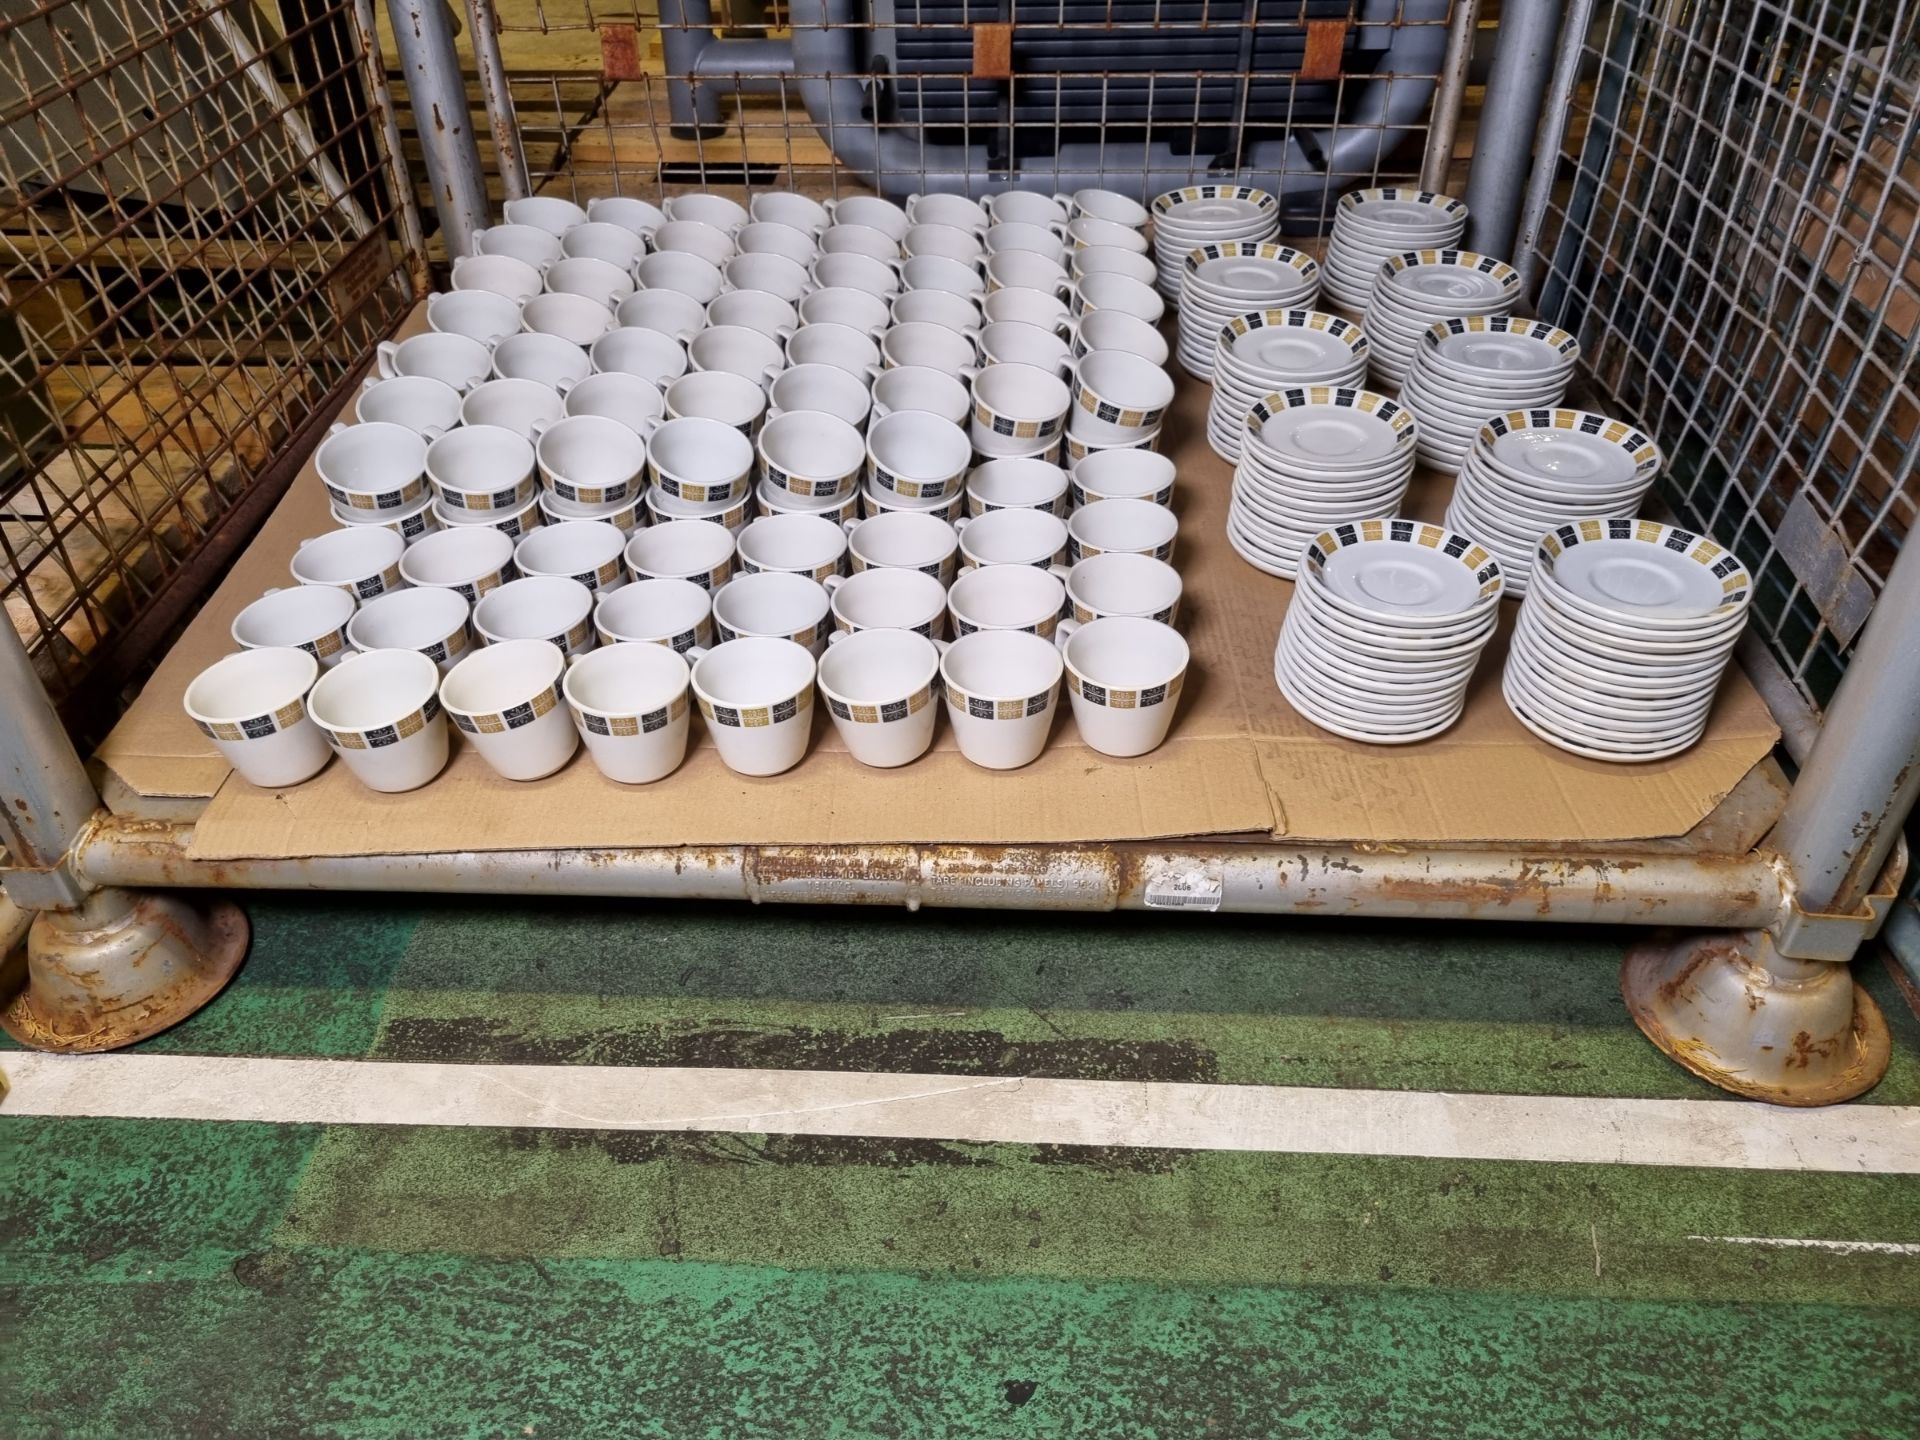 Catering equipment - Grindley White Granite Vitrified Arran cups and saucers